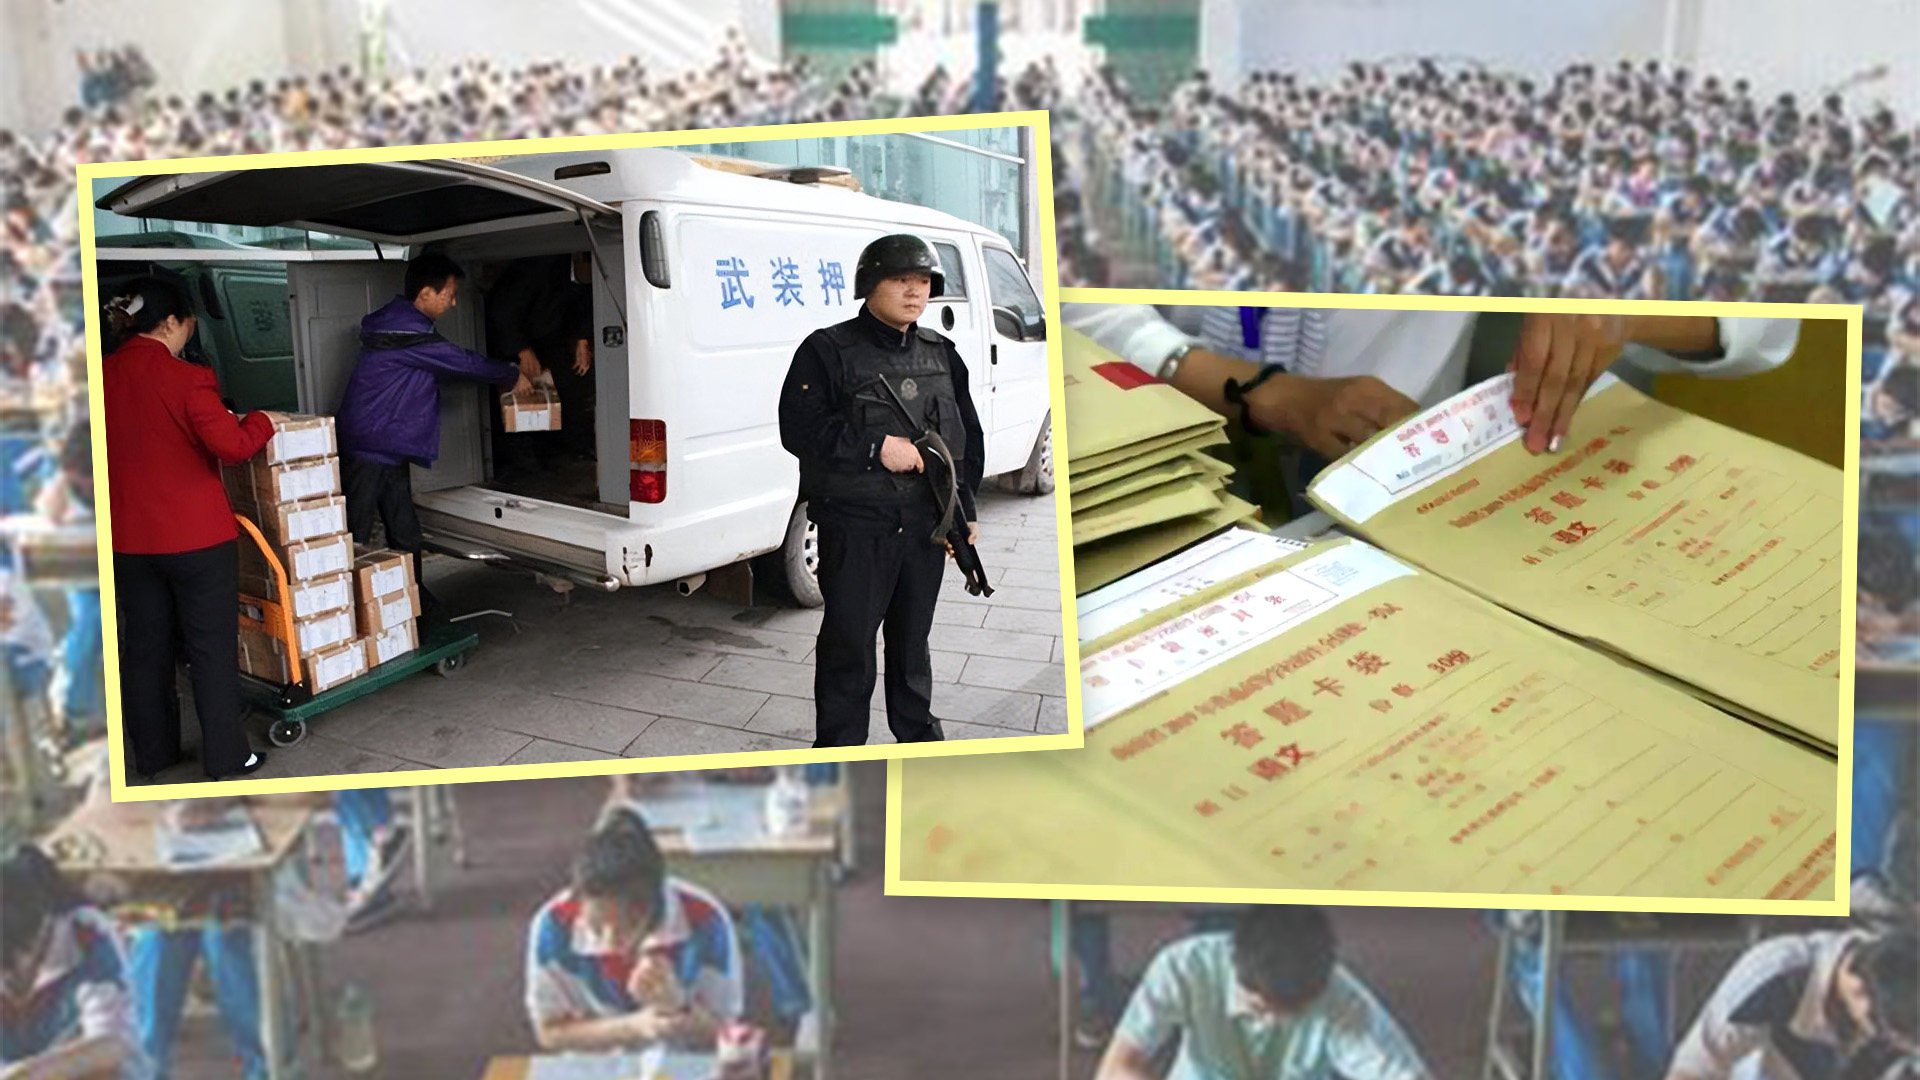 China’s most important examination for the future career prospects of students is subject to unprecedented levels of security. The Post explains why. Photo: SCMP composite/Baidu/Sohu